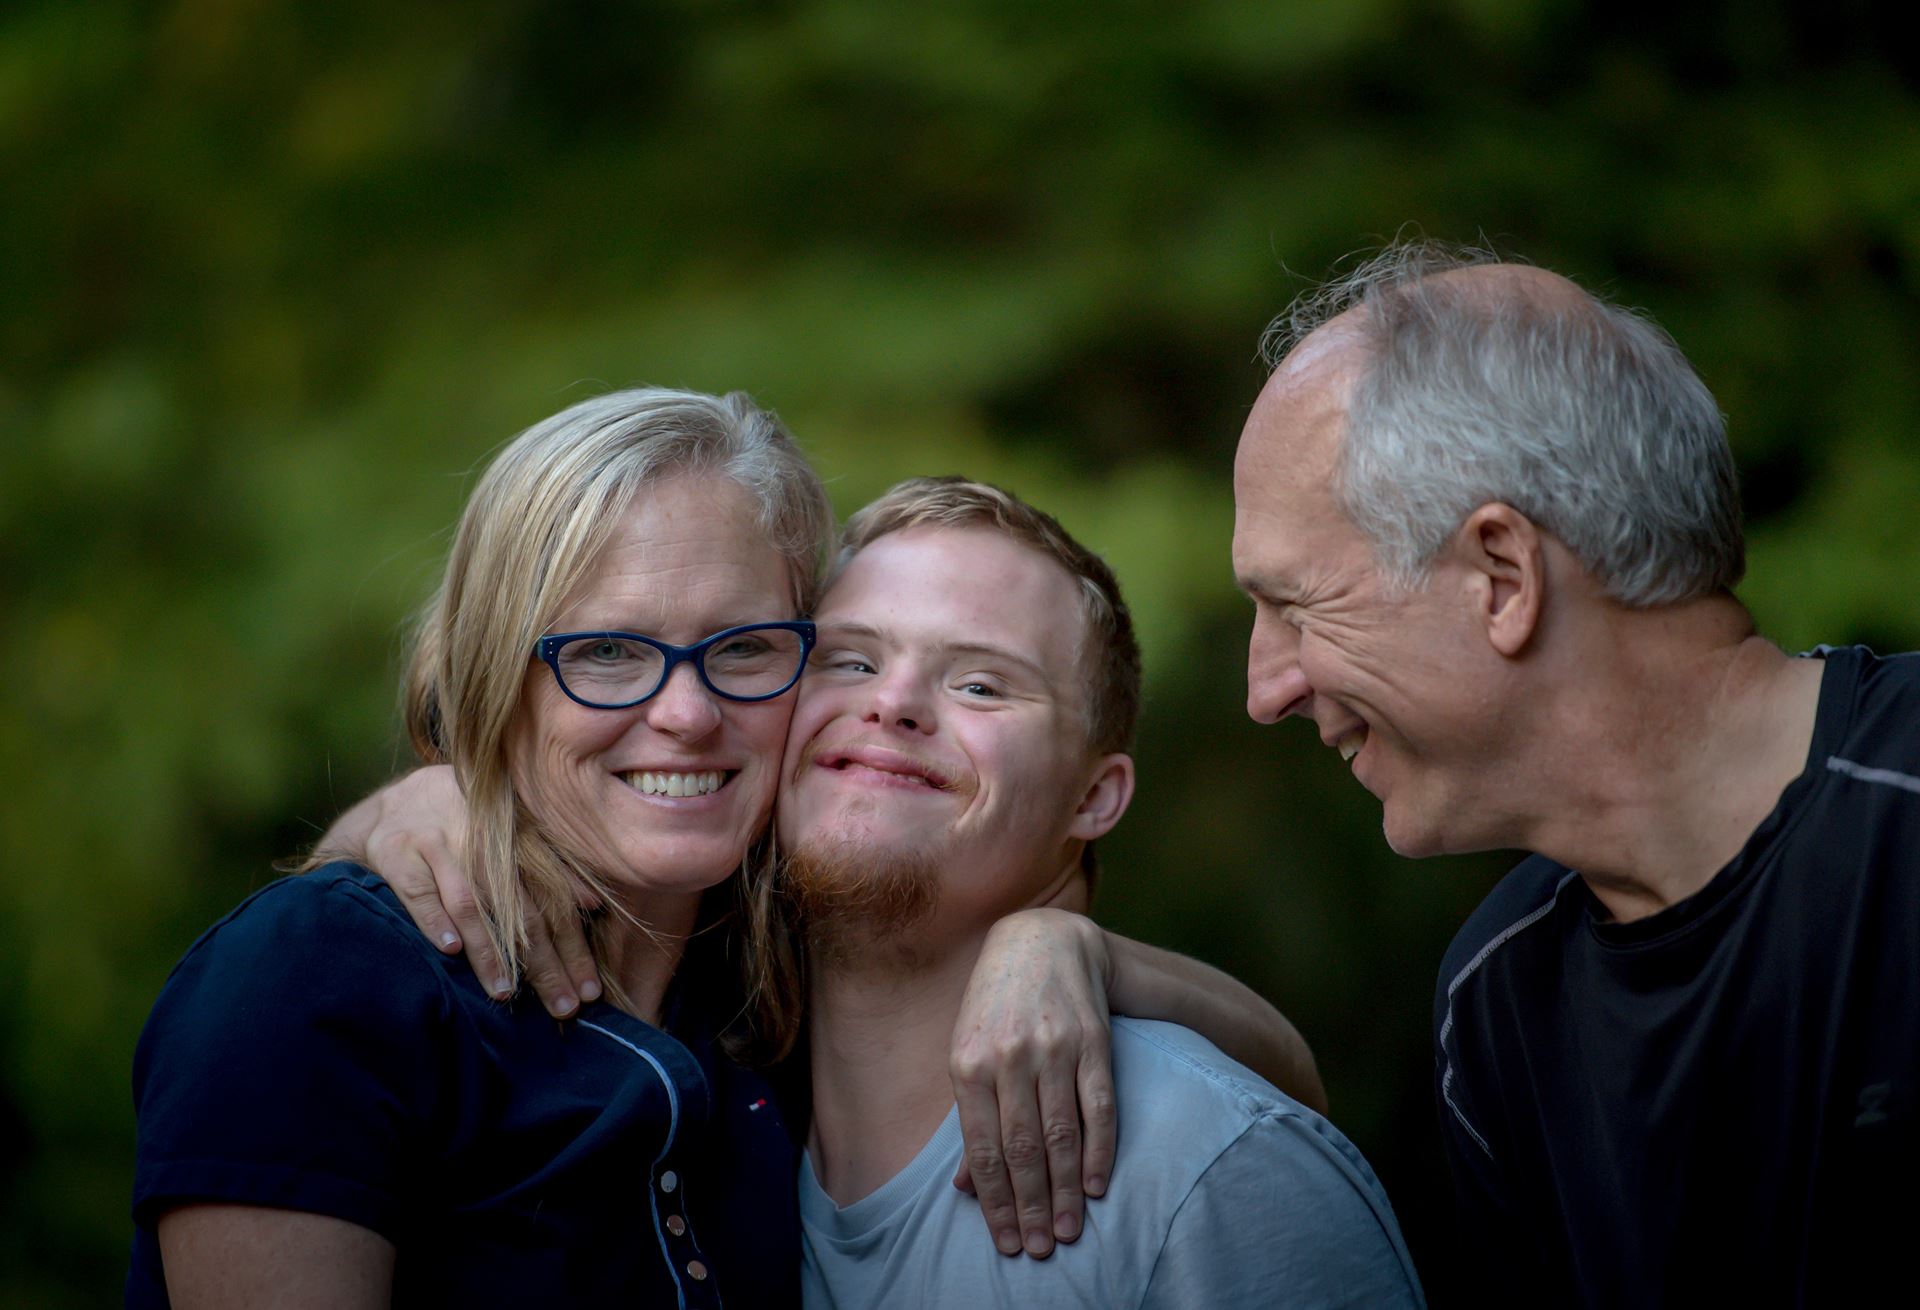 Downs syndrome man and family